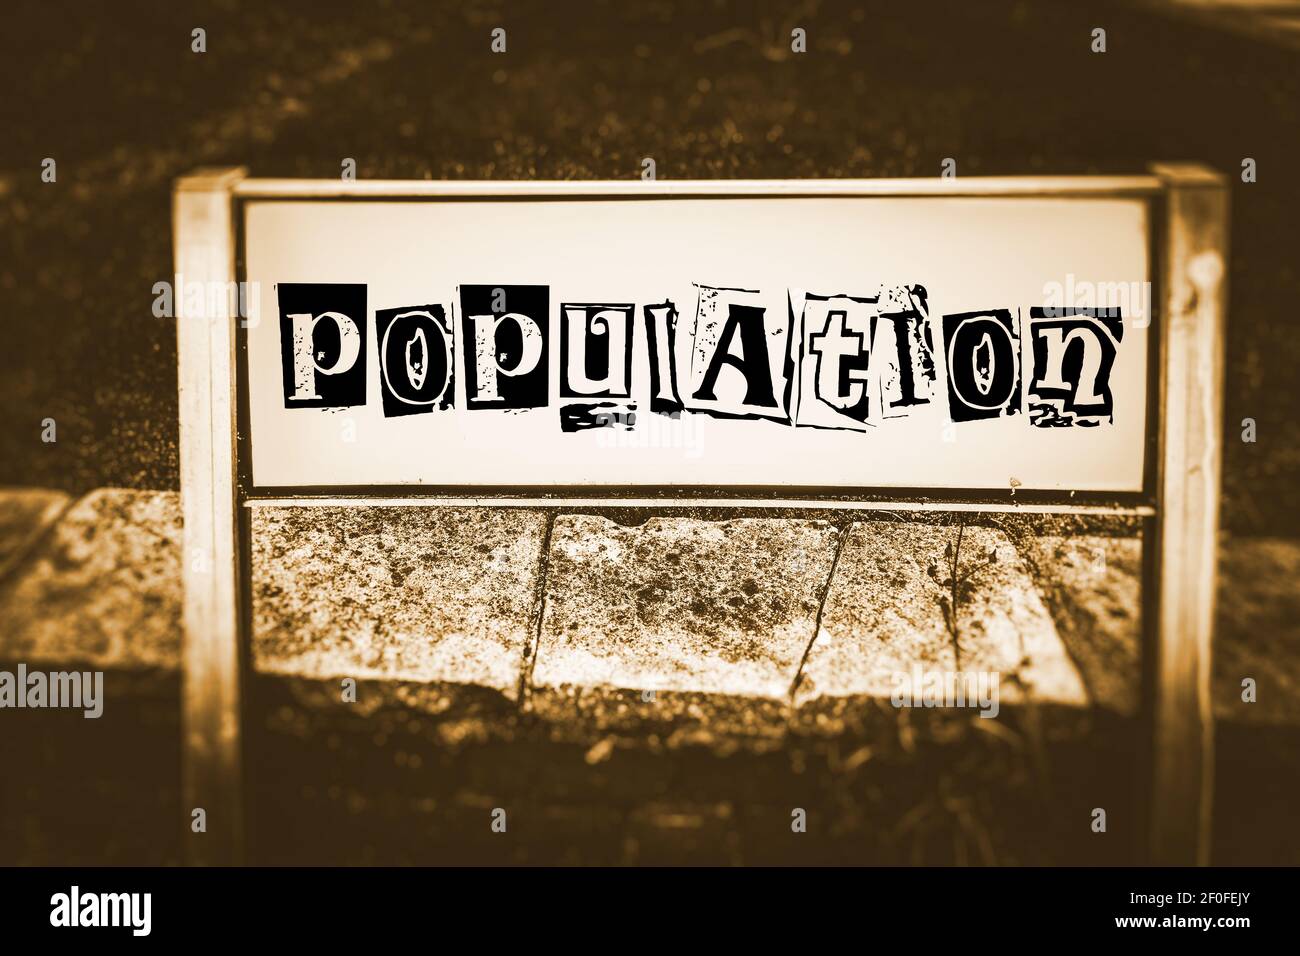 Population written on a street sign in ransom note typography in a sepia tone Stock Photo